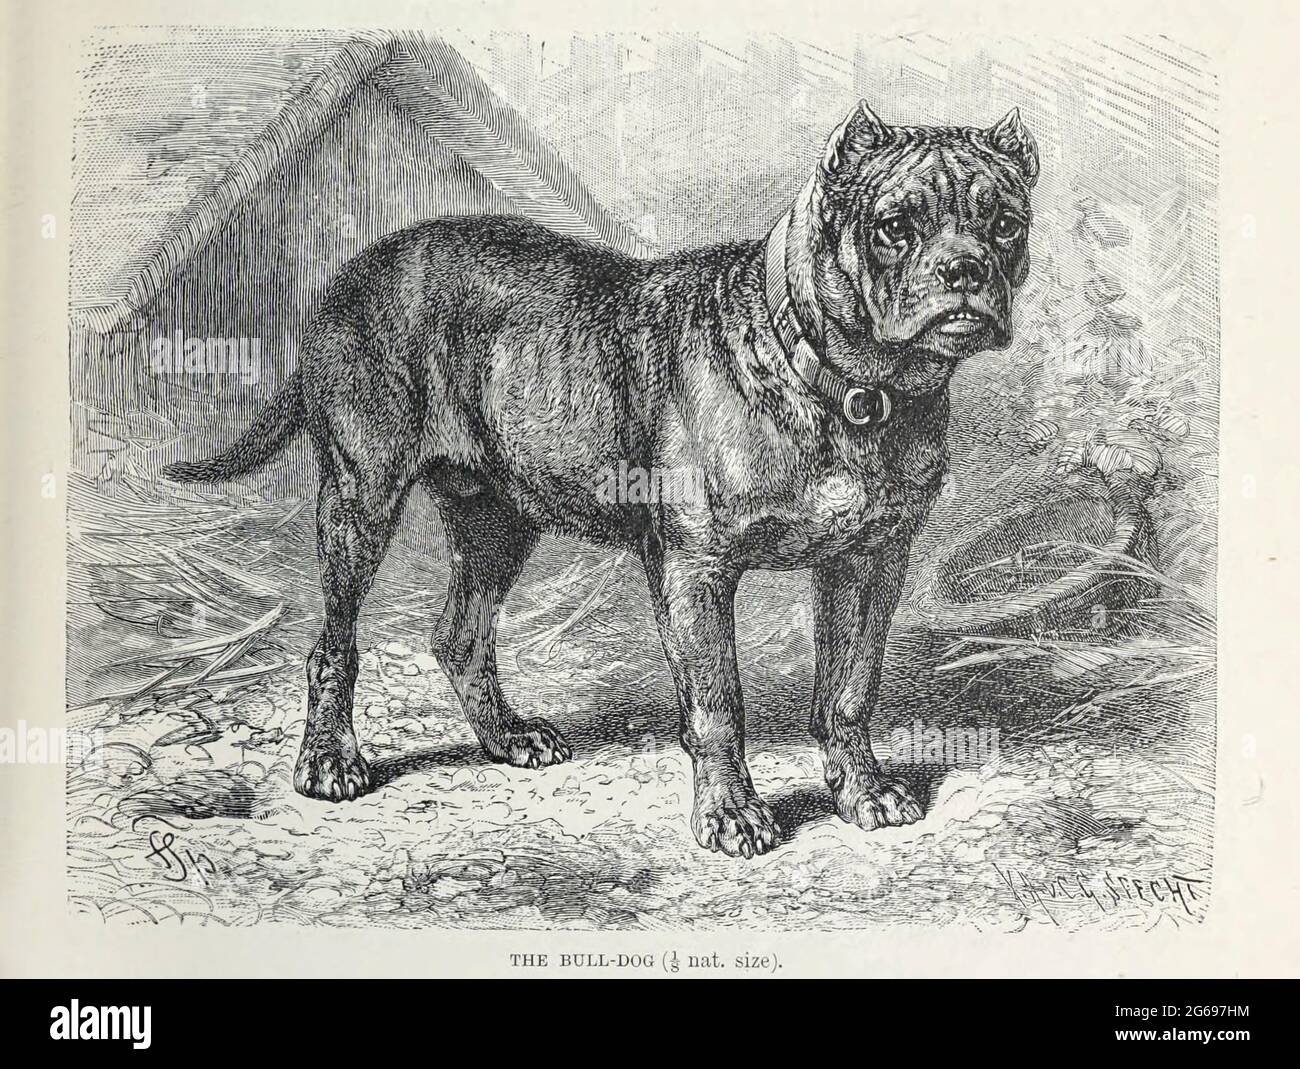 Bull-Dog [Bulldog] From the book ' Royal Natural History ' Volume 1 Section II Edited by  Richard Lydekker, Published in London by Frederick Warne & Co in 1893-1894 Stock Photo